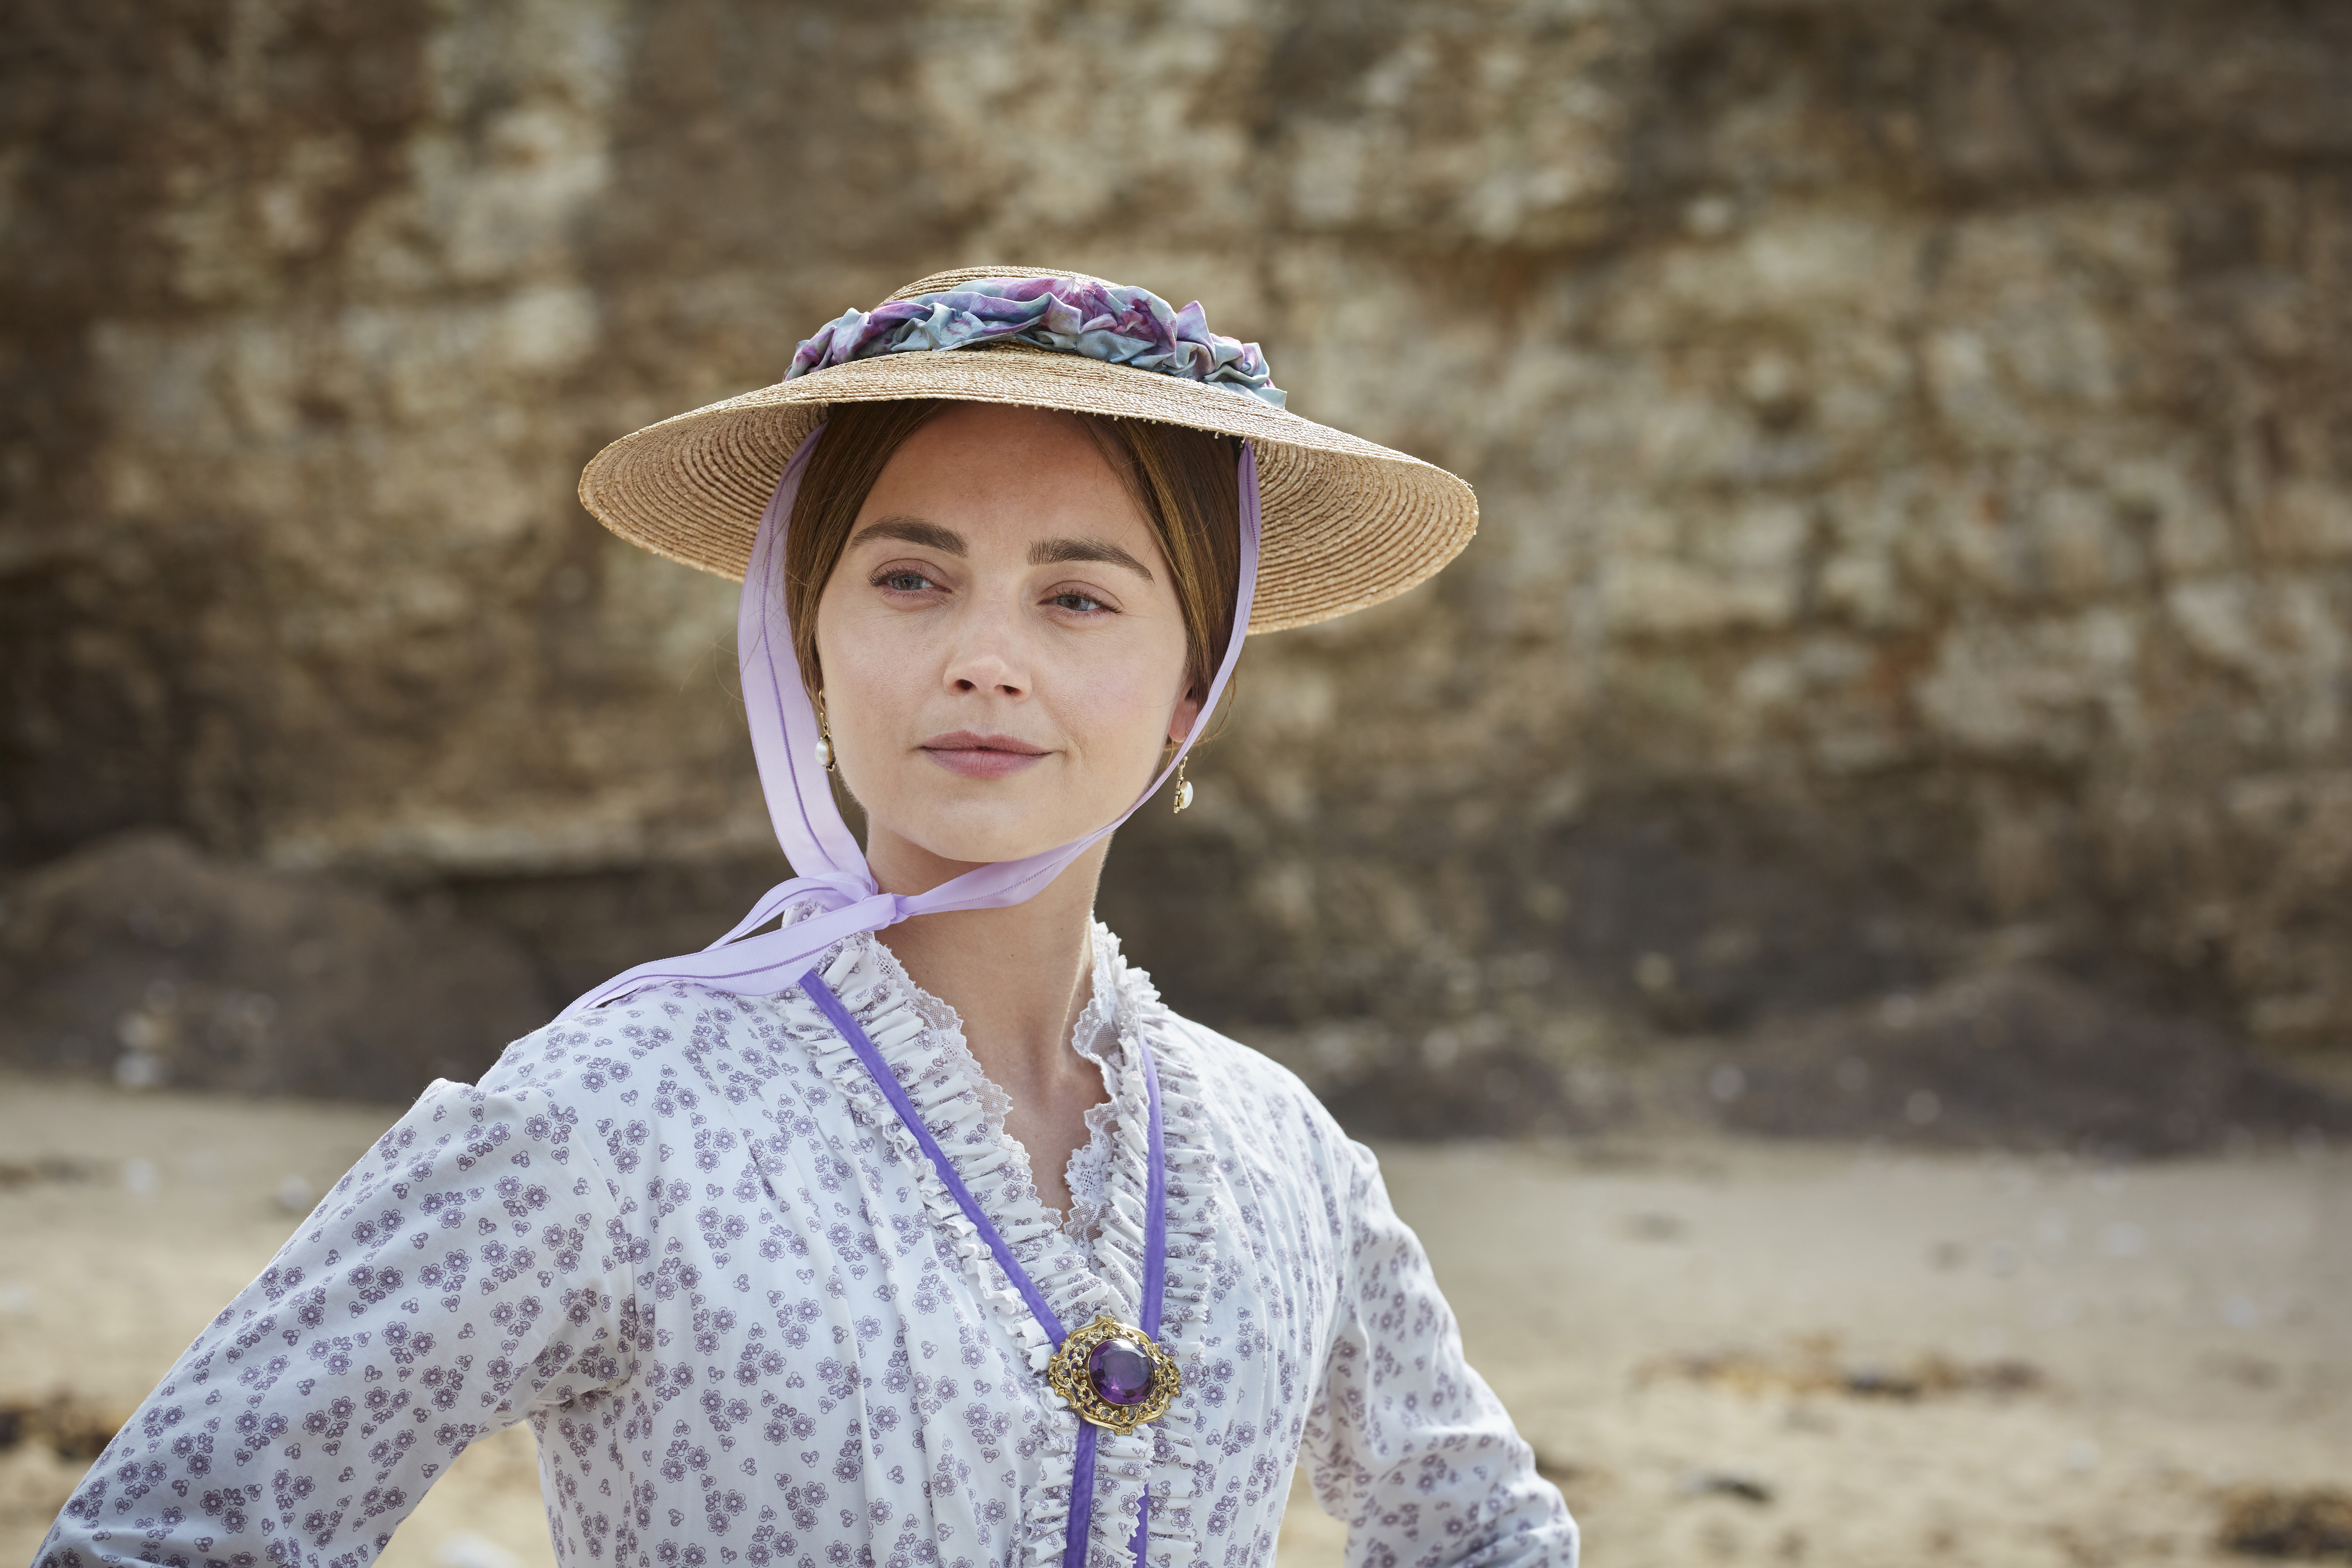 Queen Victoria played by Jenna Coleman